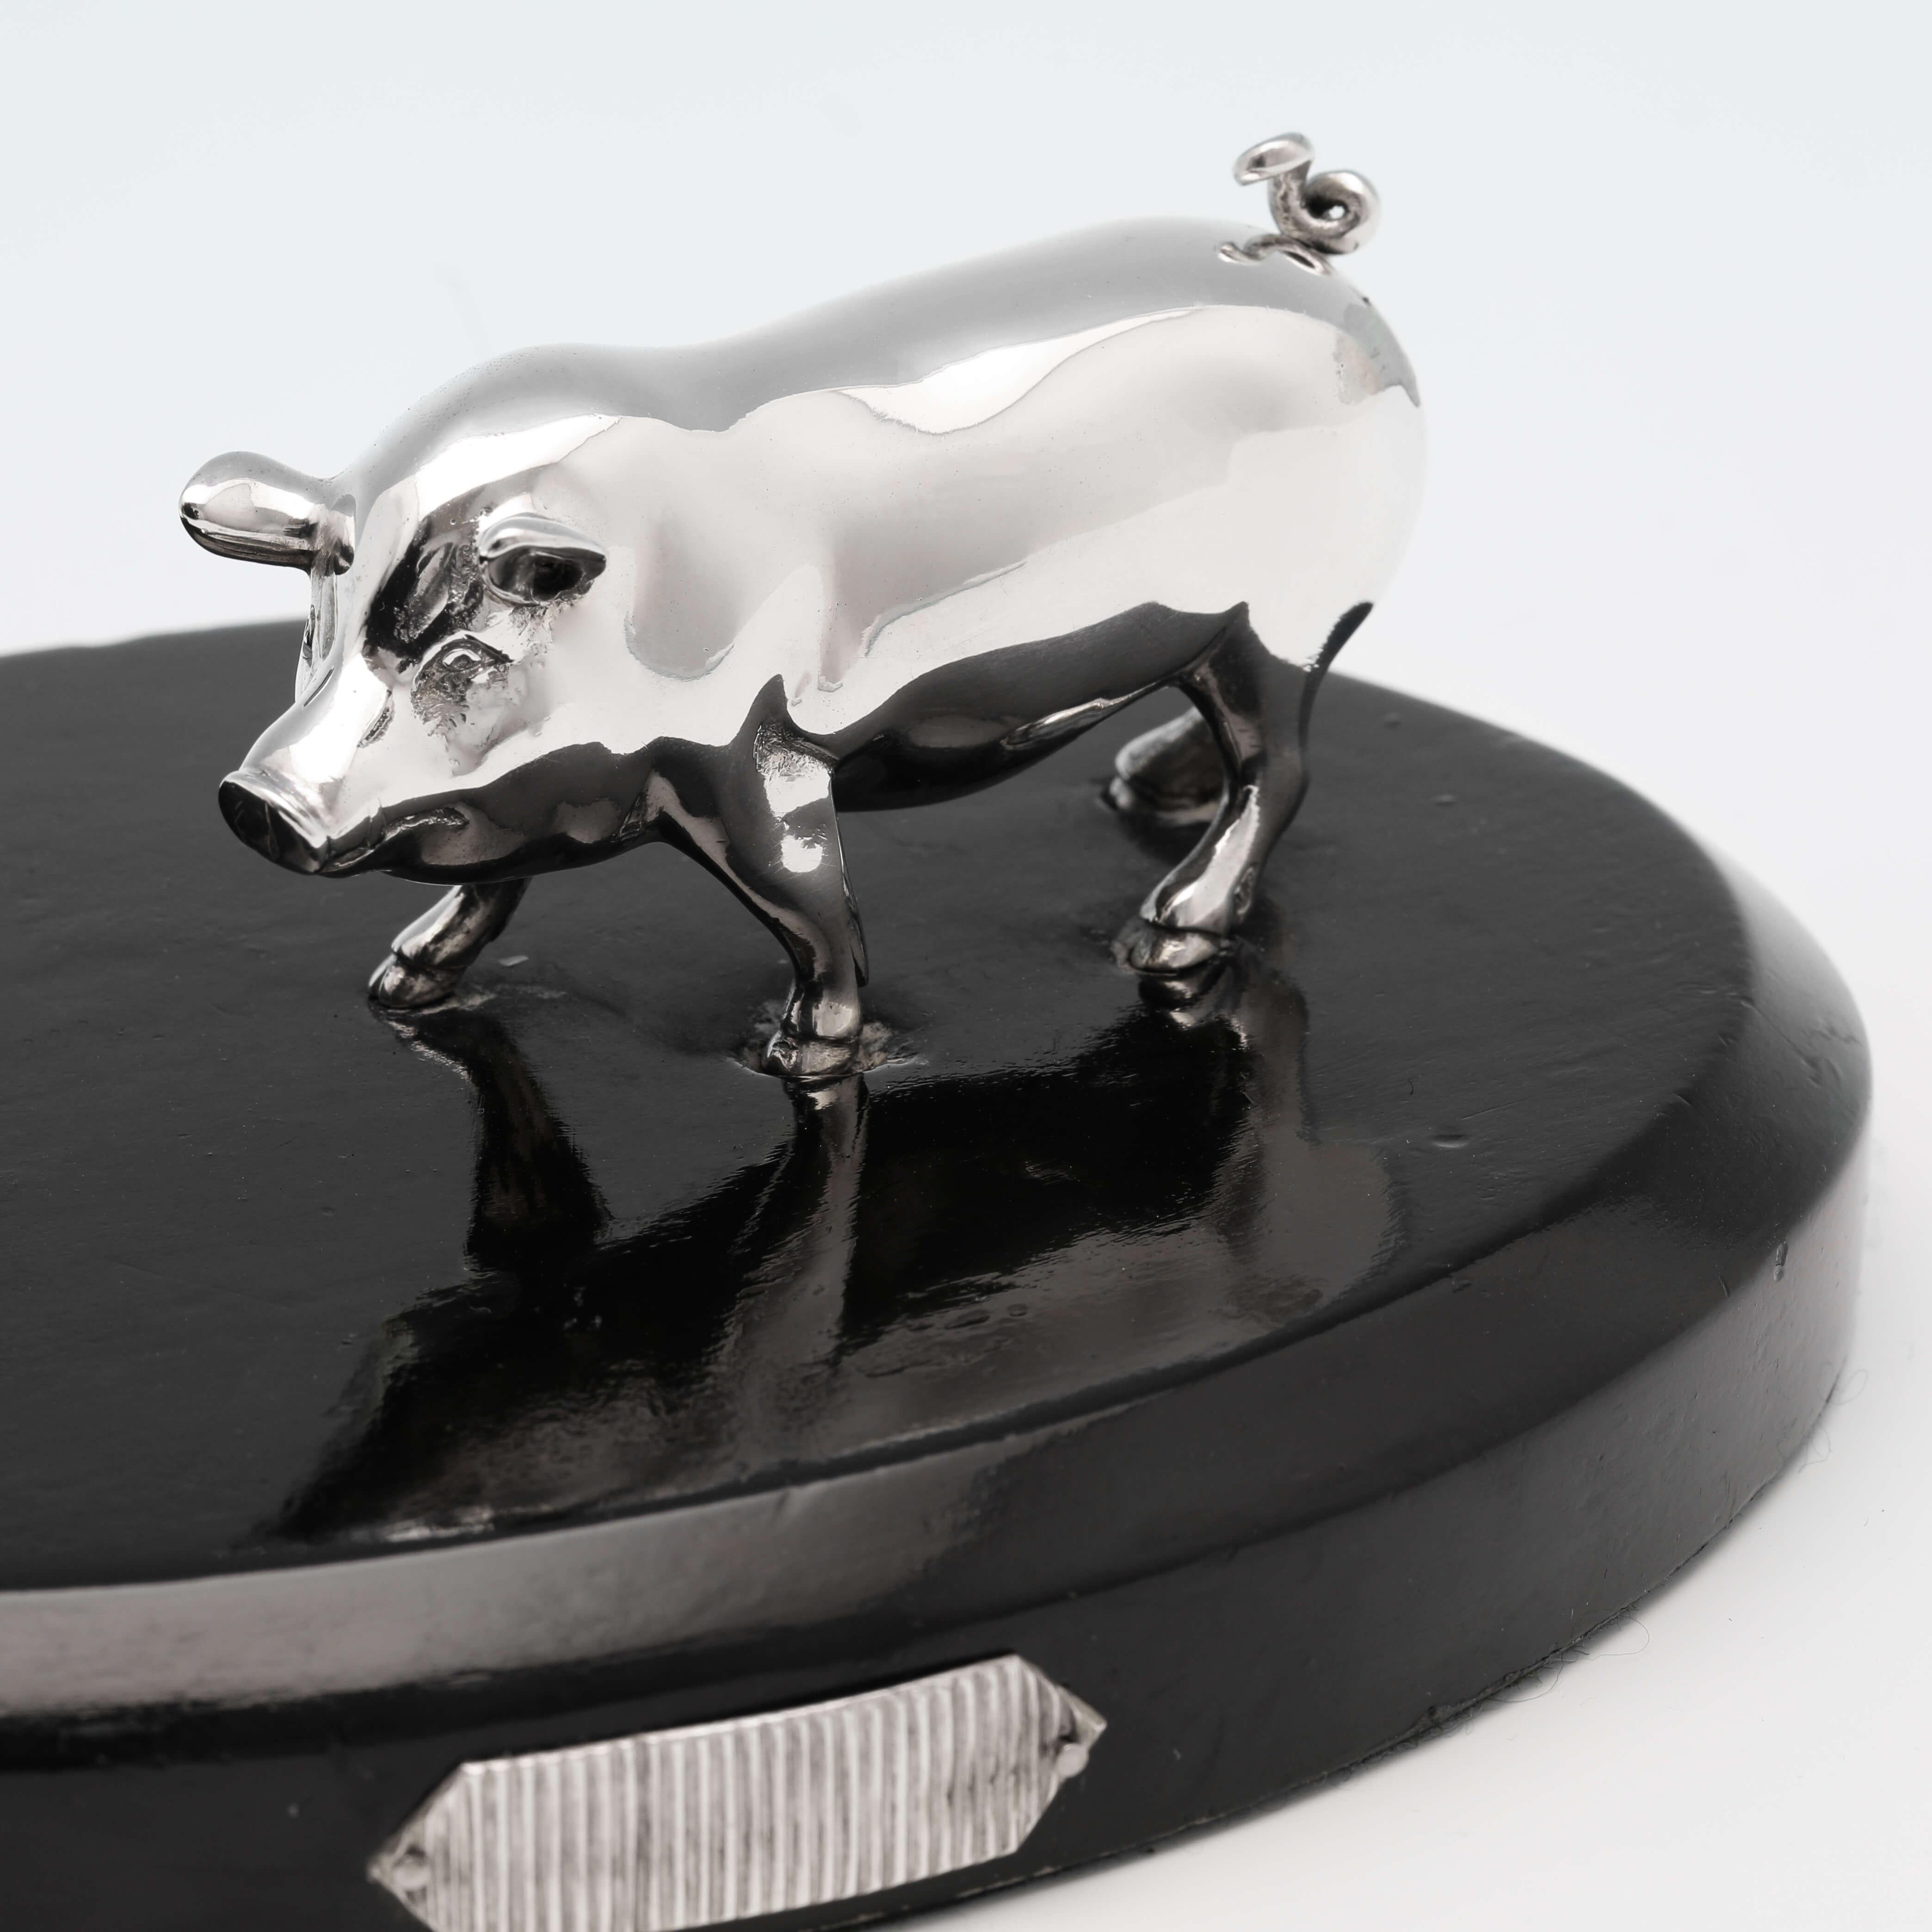 English Victorian Novelty Sterling Silver Pig and Trough Match Strike 1885 J. Braham For Sale